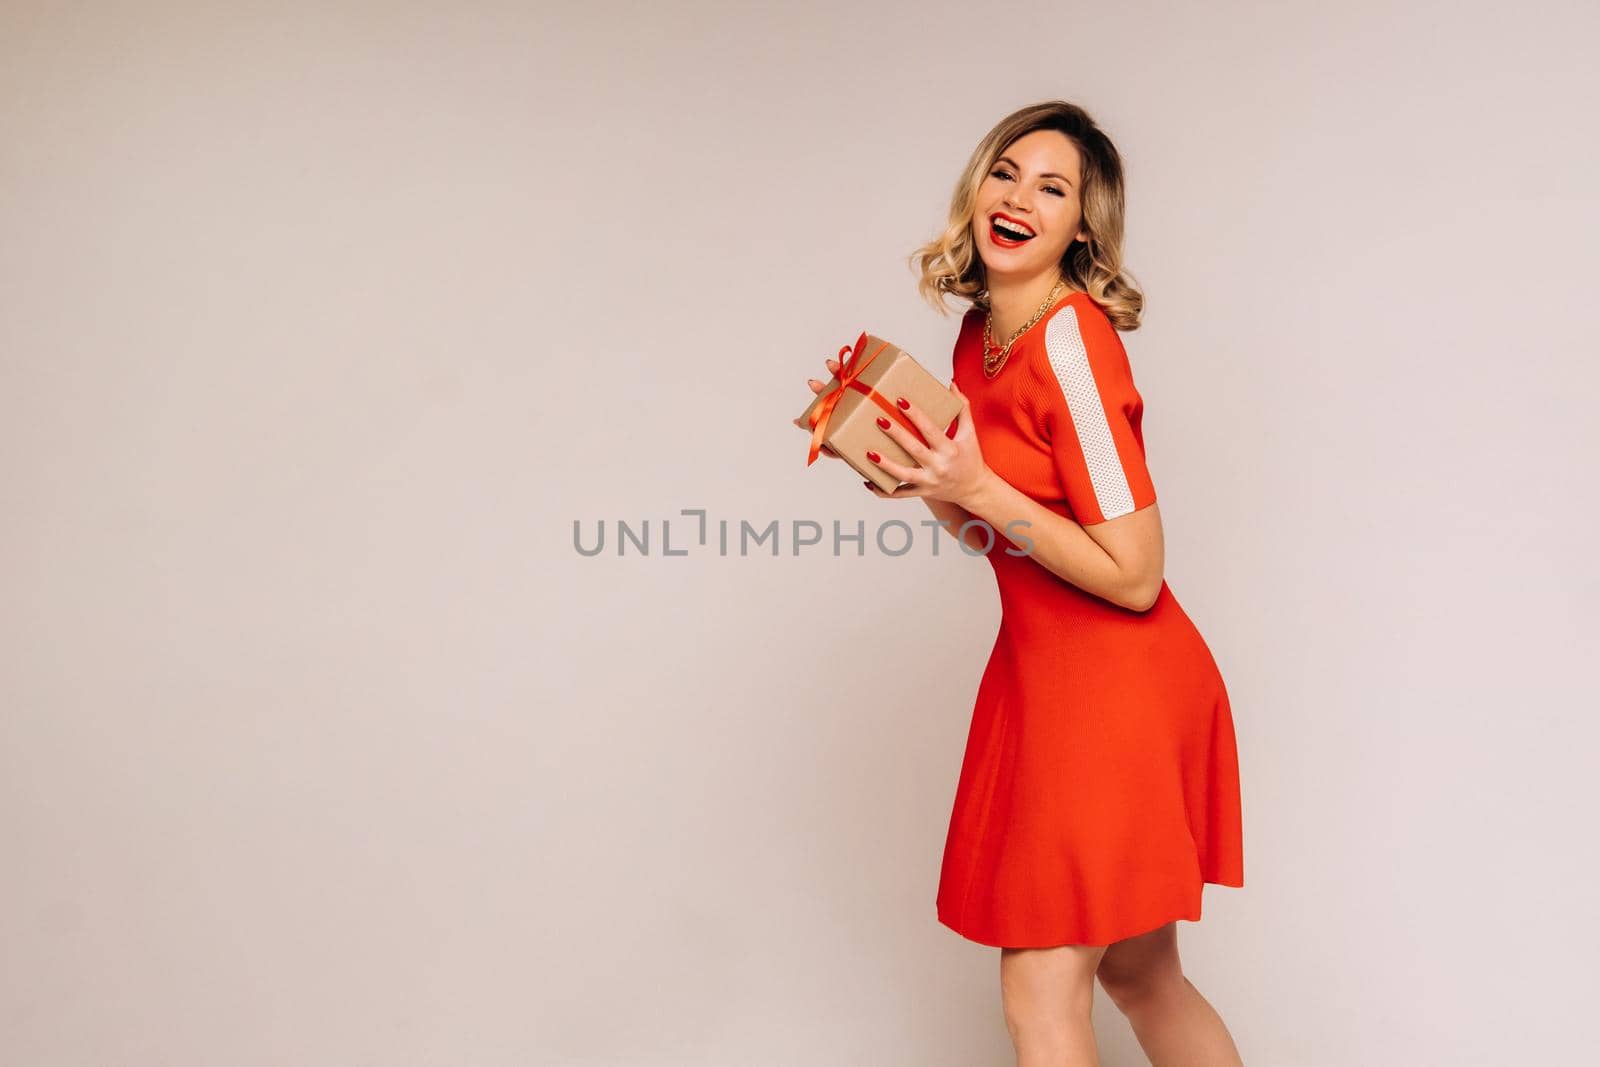 A girl in a red dress stands with gifts in her hands on a gray background by Lobachad